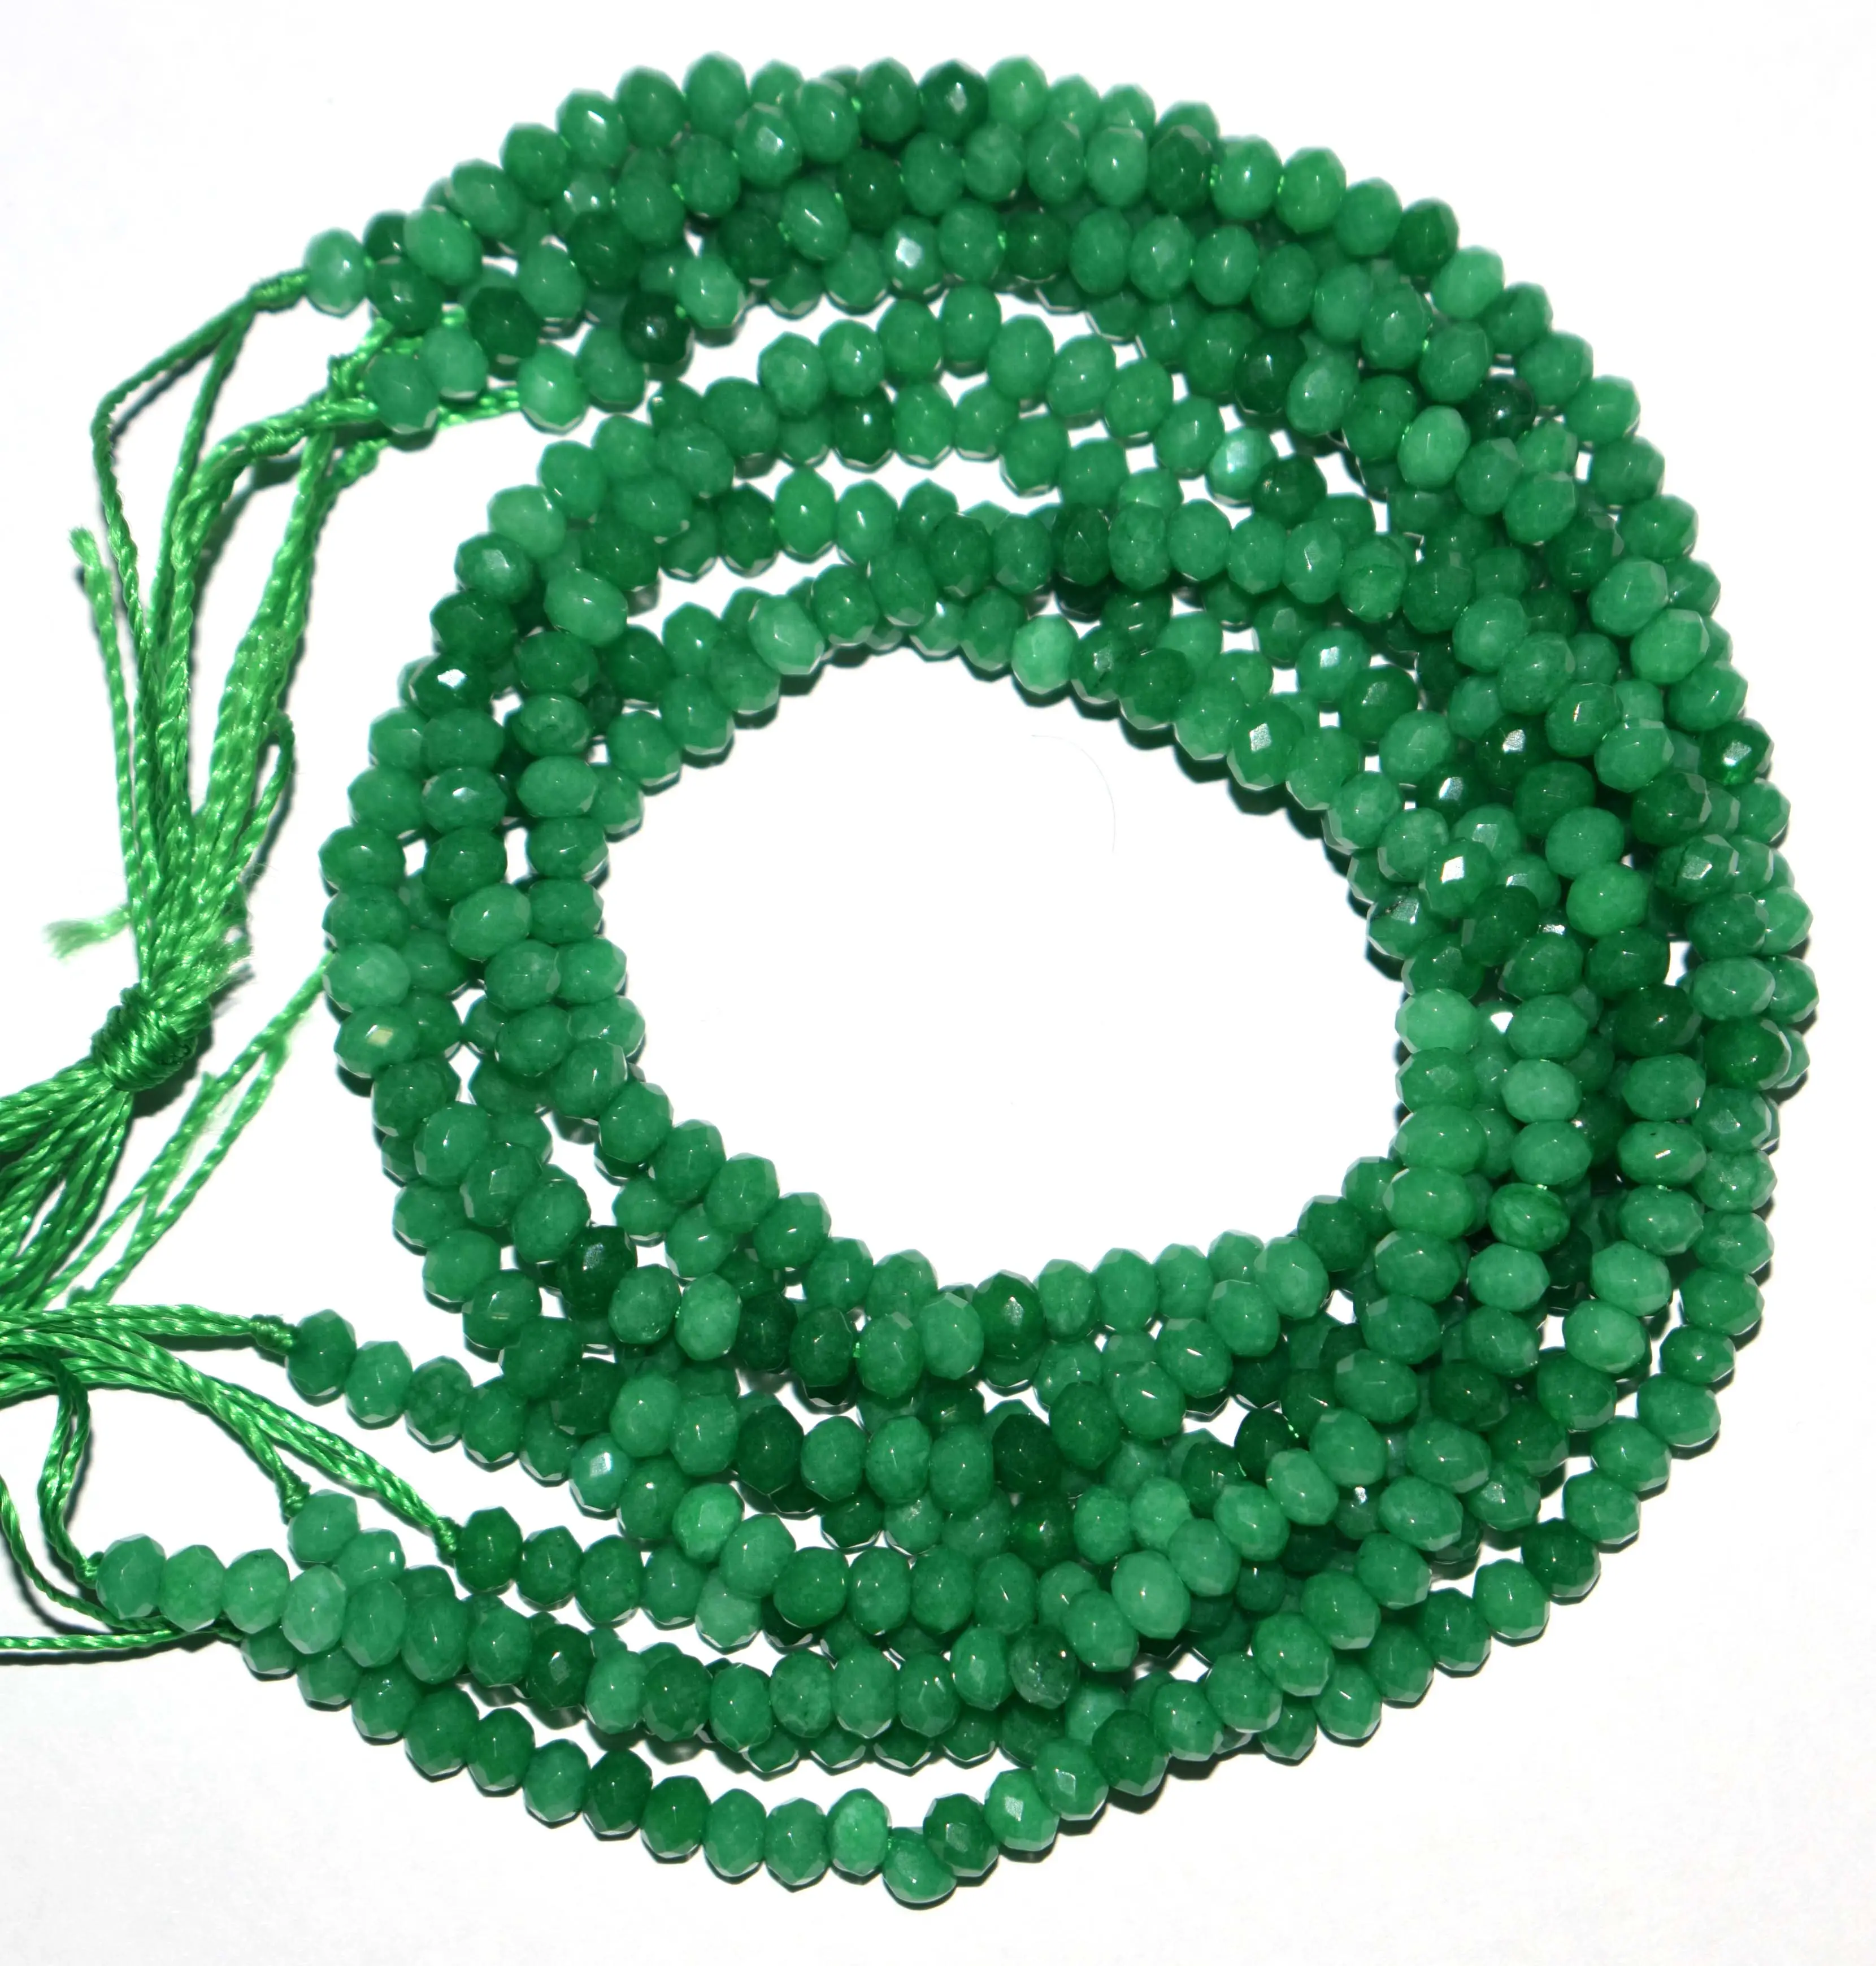 Customized natural green jade gemstone 4 mm round beads 13 inch loose Smooth beads strands for Necklace bracelets jewelry making